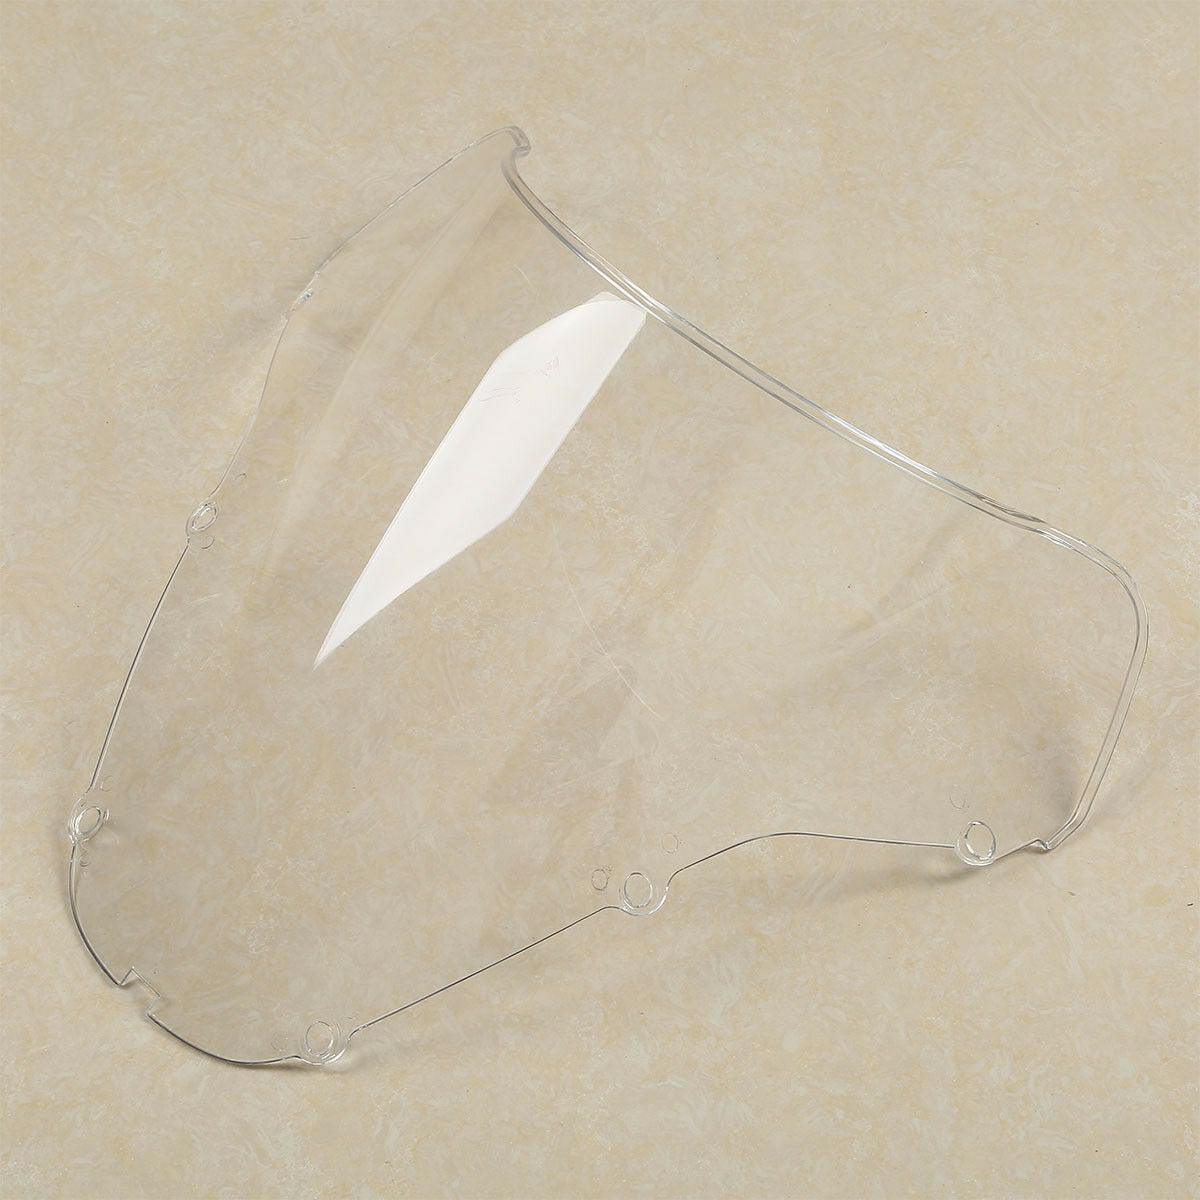 Clear Windshield Shield Windscreen Fit For Honda CBR 929RR CBR900RR 2000-2001 - Moto Life Products